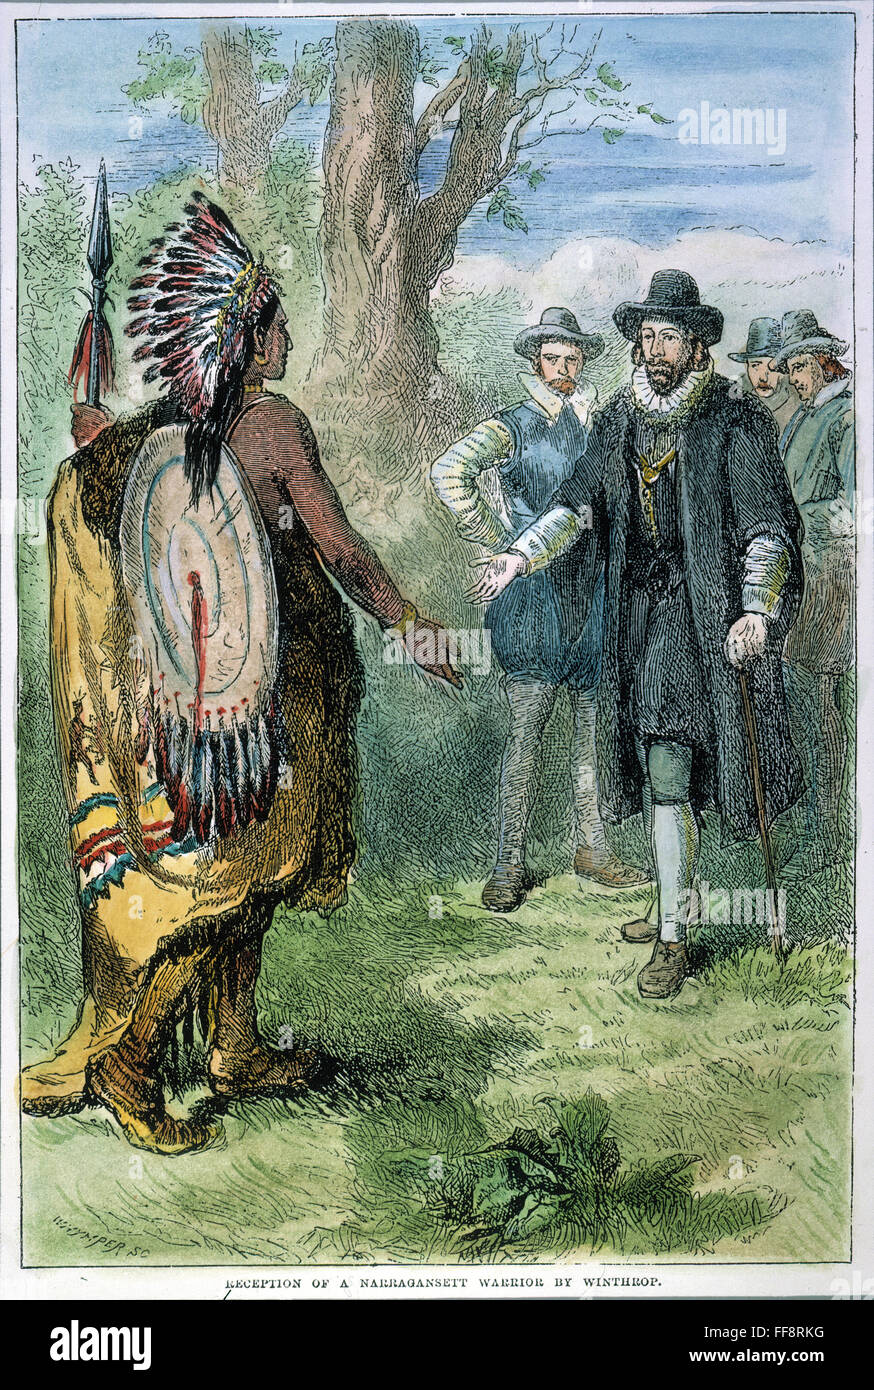 GOVERNOR JOHN WINTHROP /nof the Massachusetts Bay Colony meeting with a Narragansett Native American warrior, c1631. Wood engraving, c19th century. Stock Photo